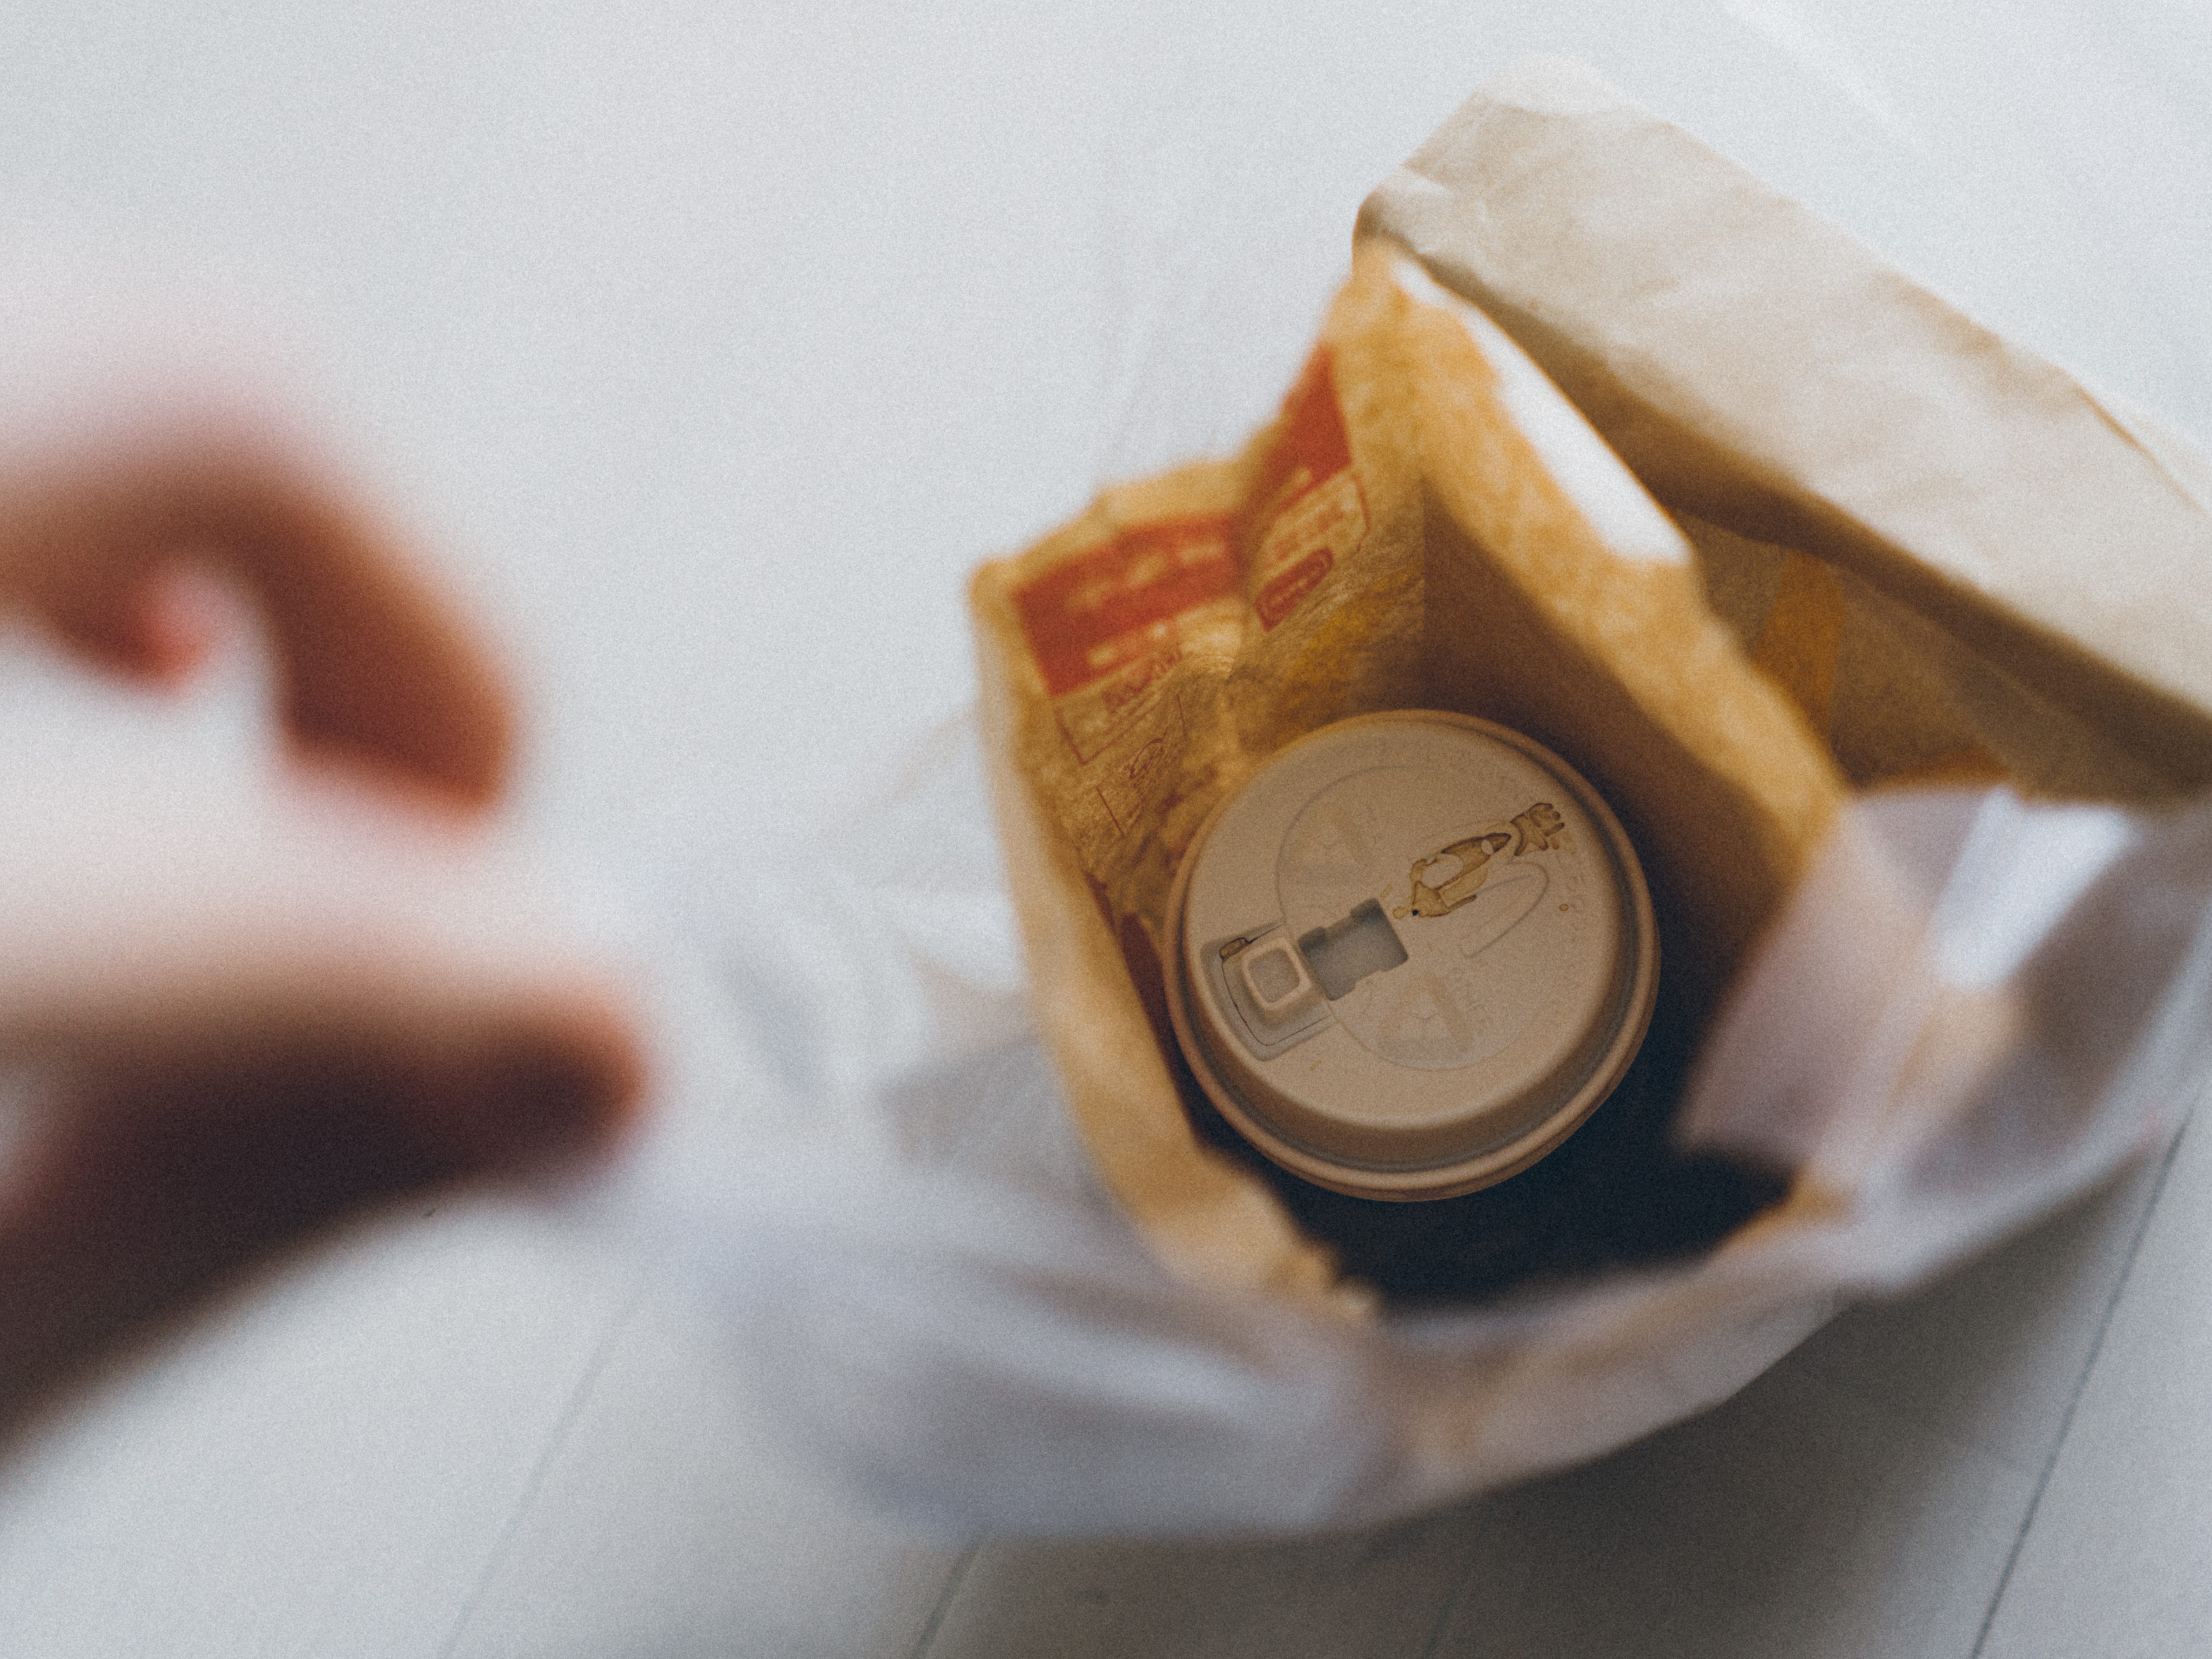 What makes Japanese food packaging more innovative and user